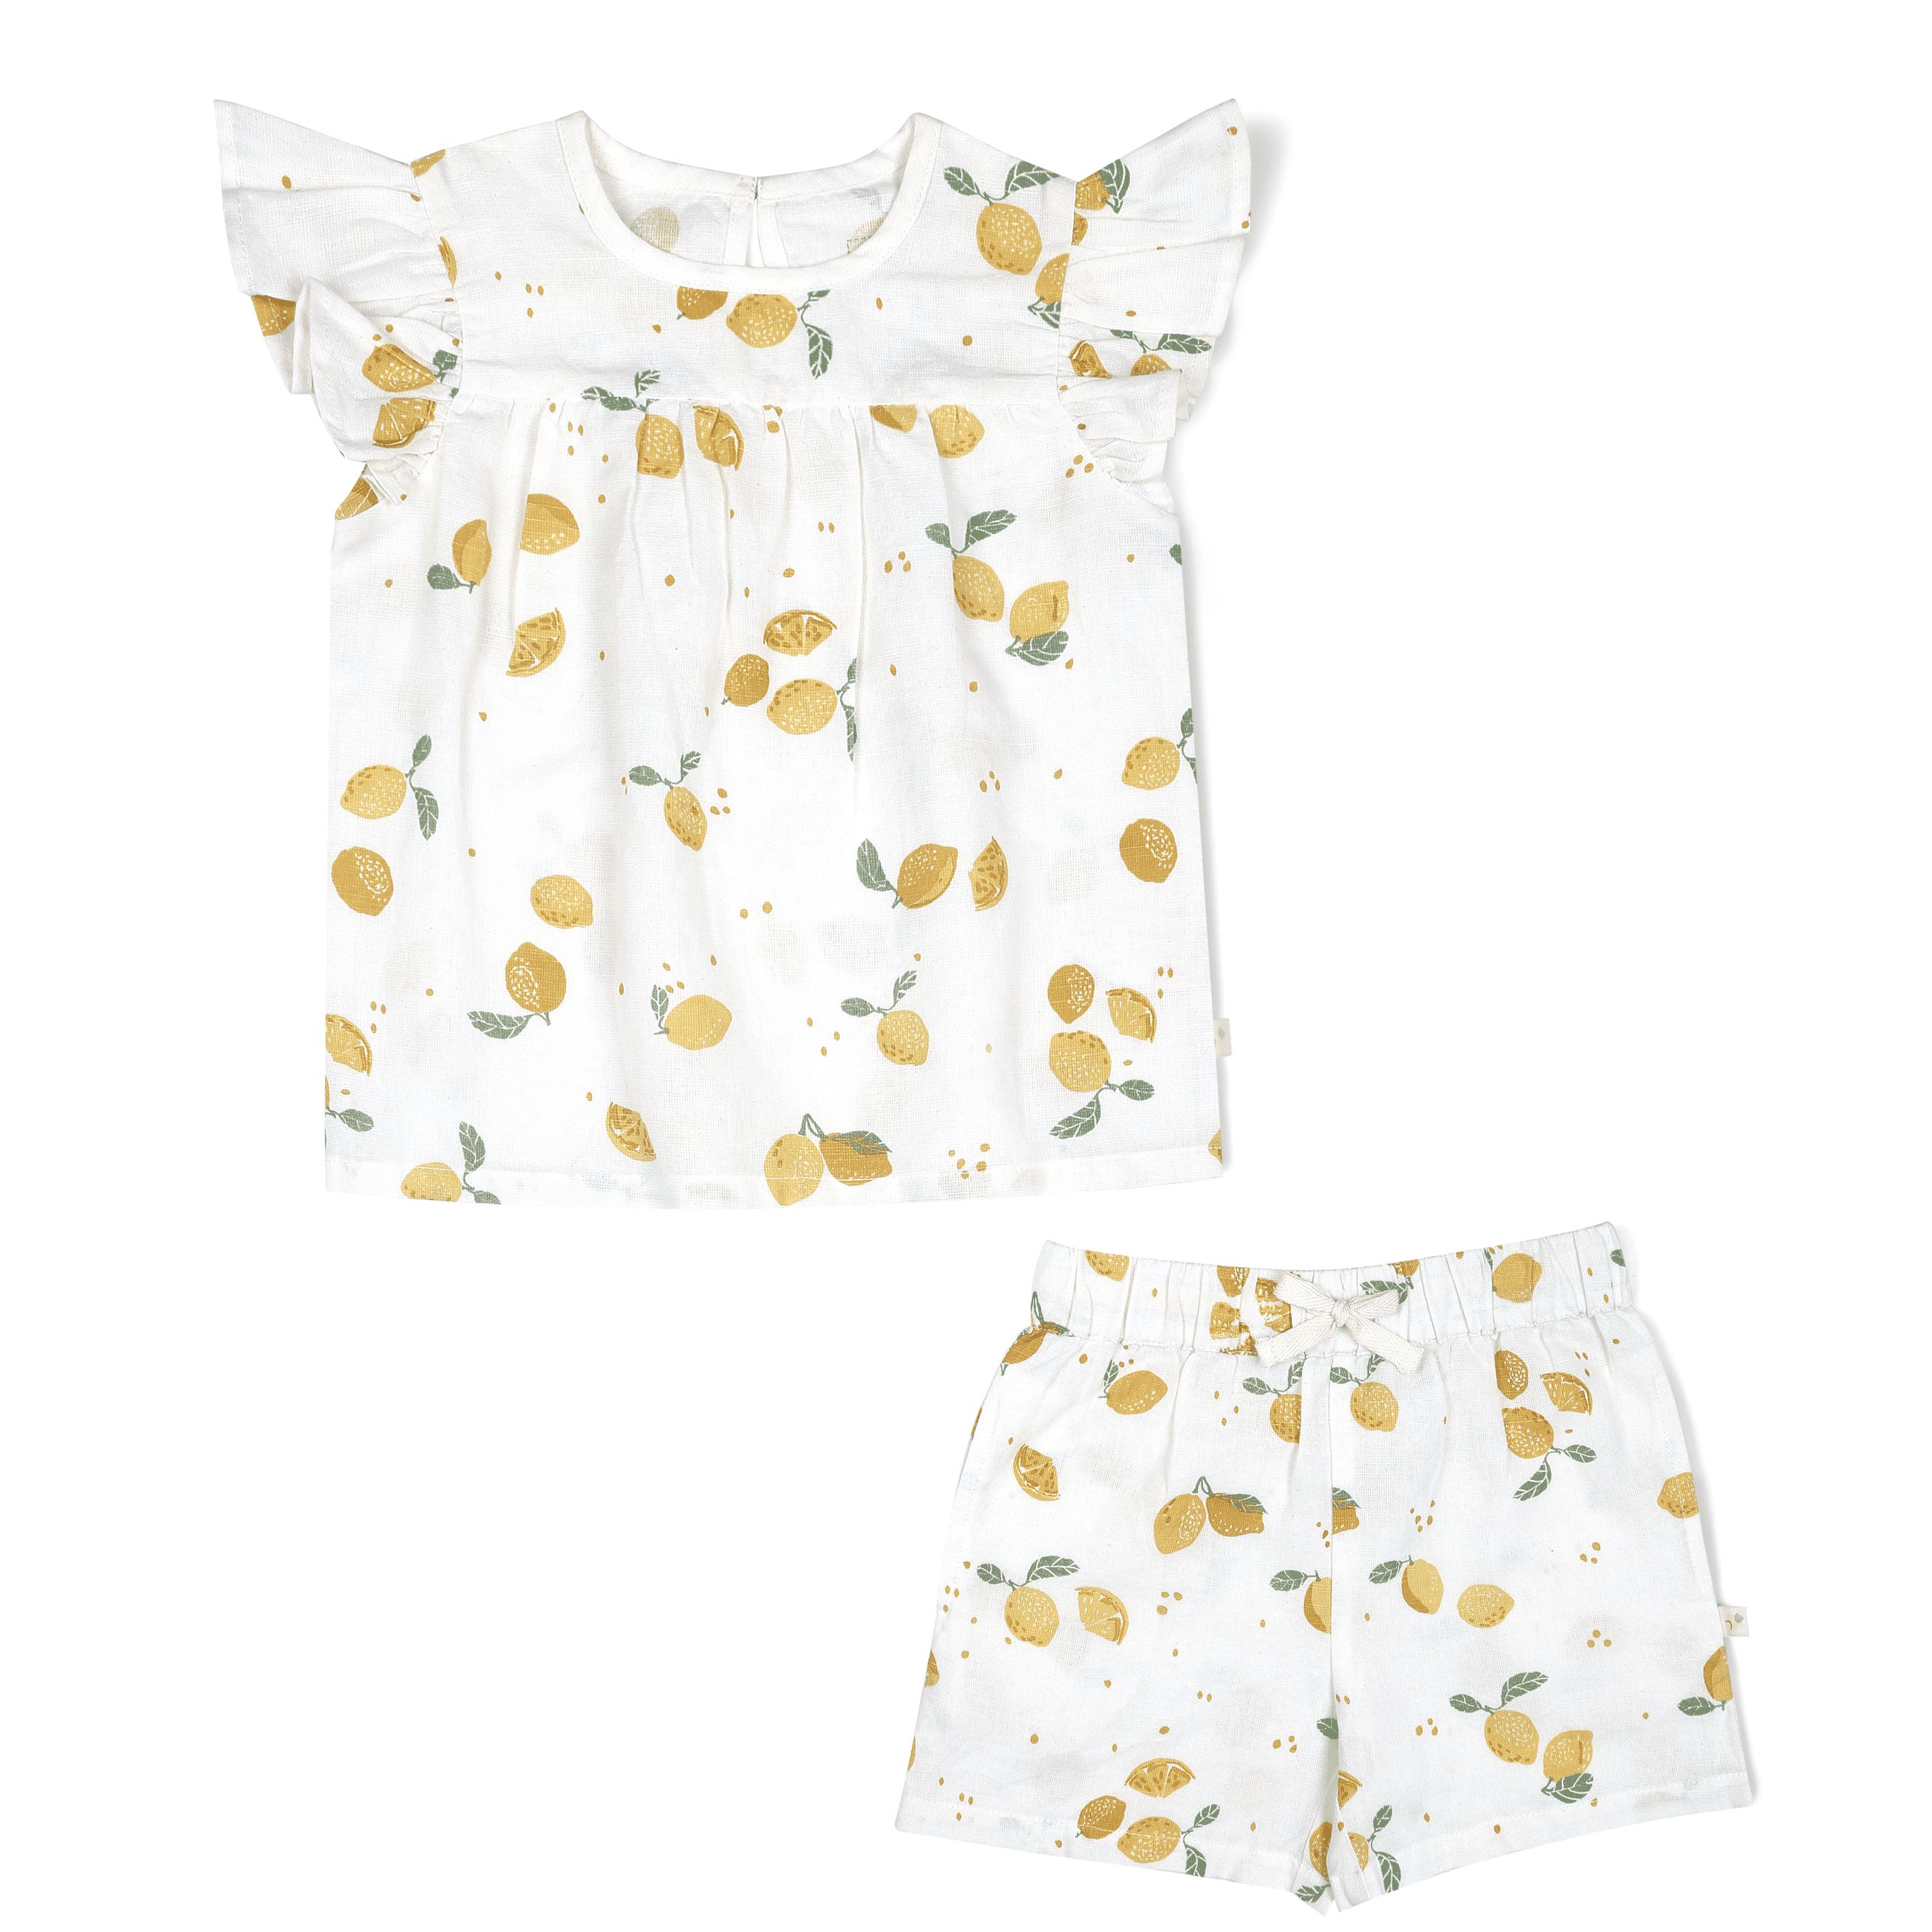 A Makemake Organics Organic Linen Flutter Top and Shorts in Citron, consisting of a flutter sleeve top and matching shorts adorned with a pattern of gold and green lemons. The set is displayed flat on a white background.